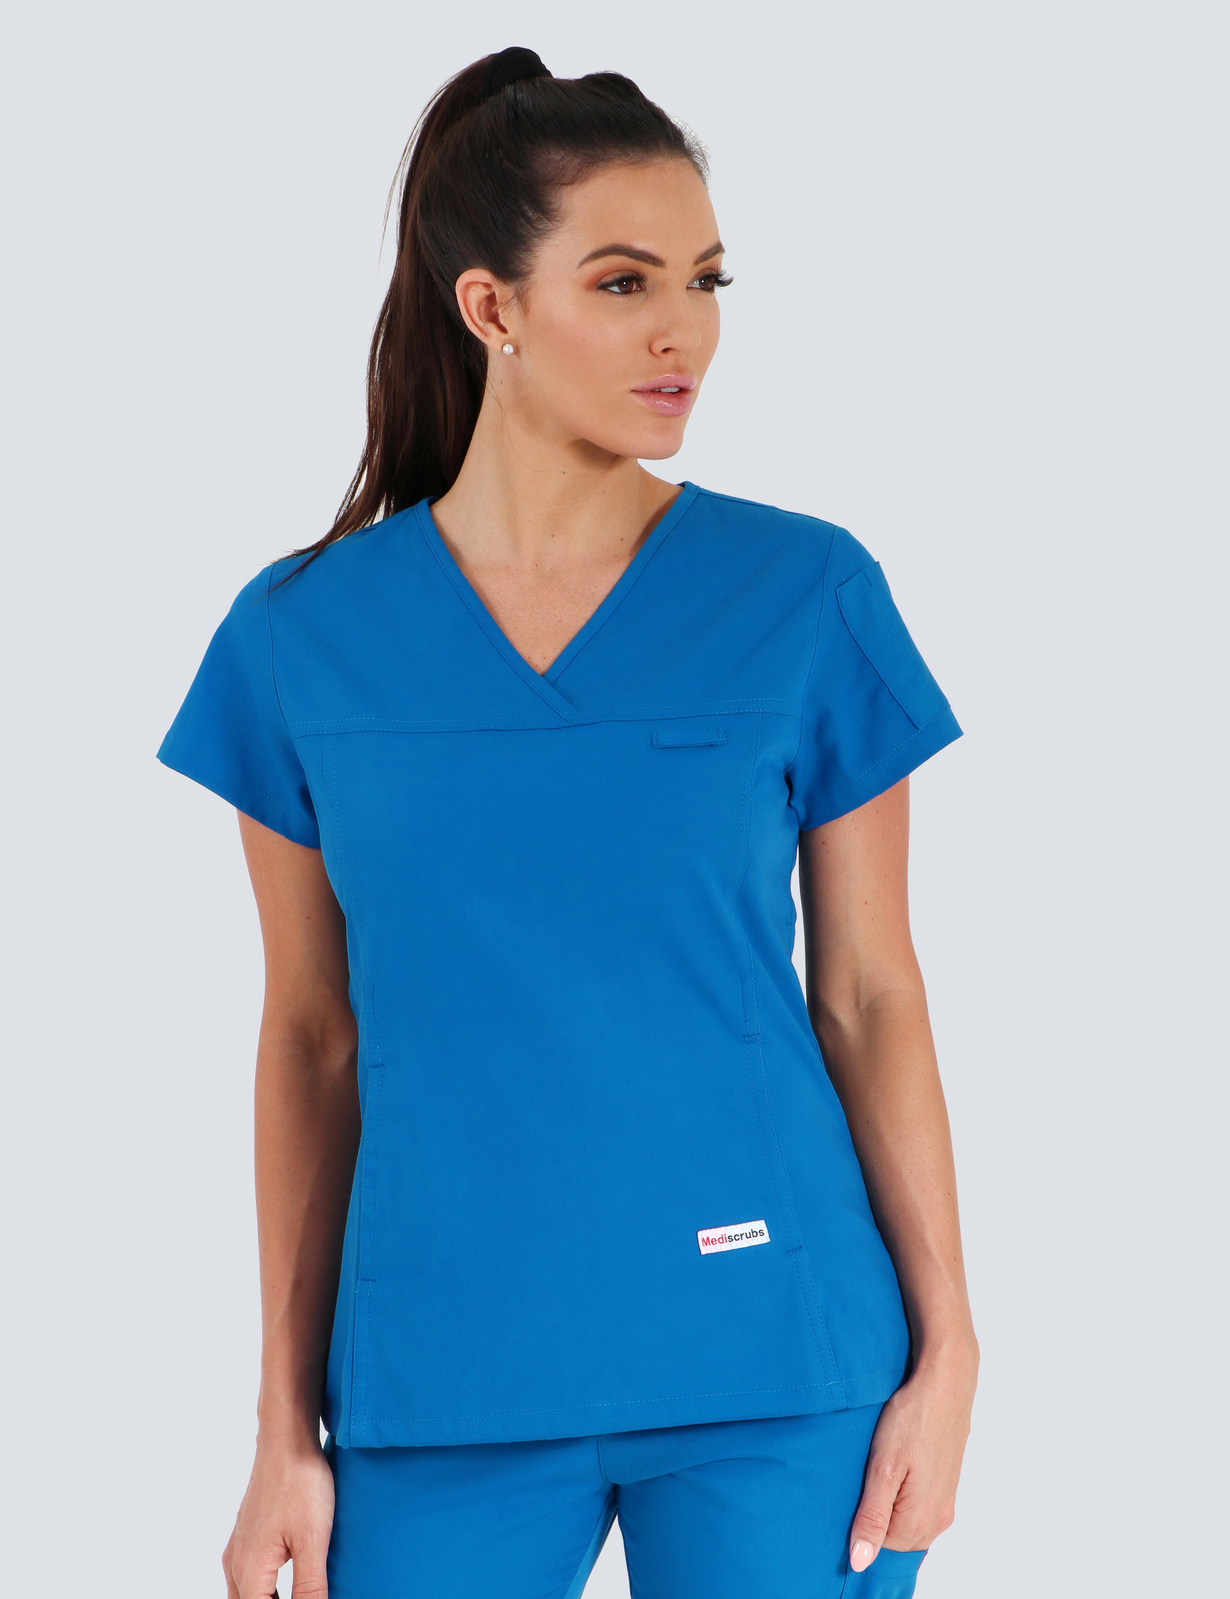 Women's Fit Solid Scrub Top